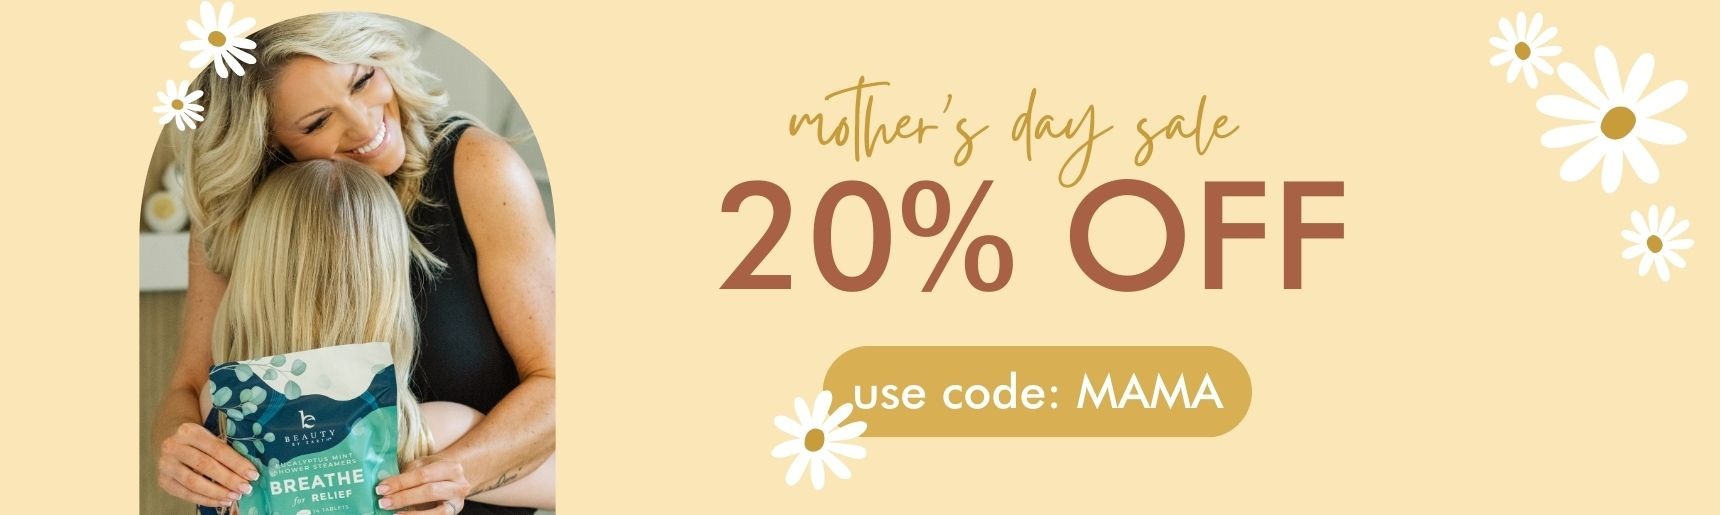 Mother's Day Sale 20% OFF with code: MAMA